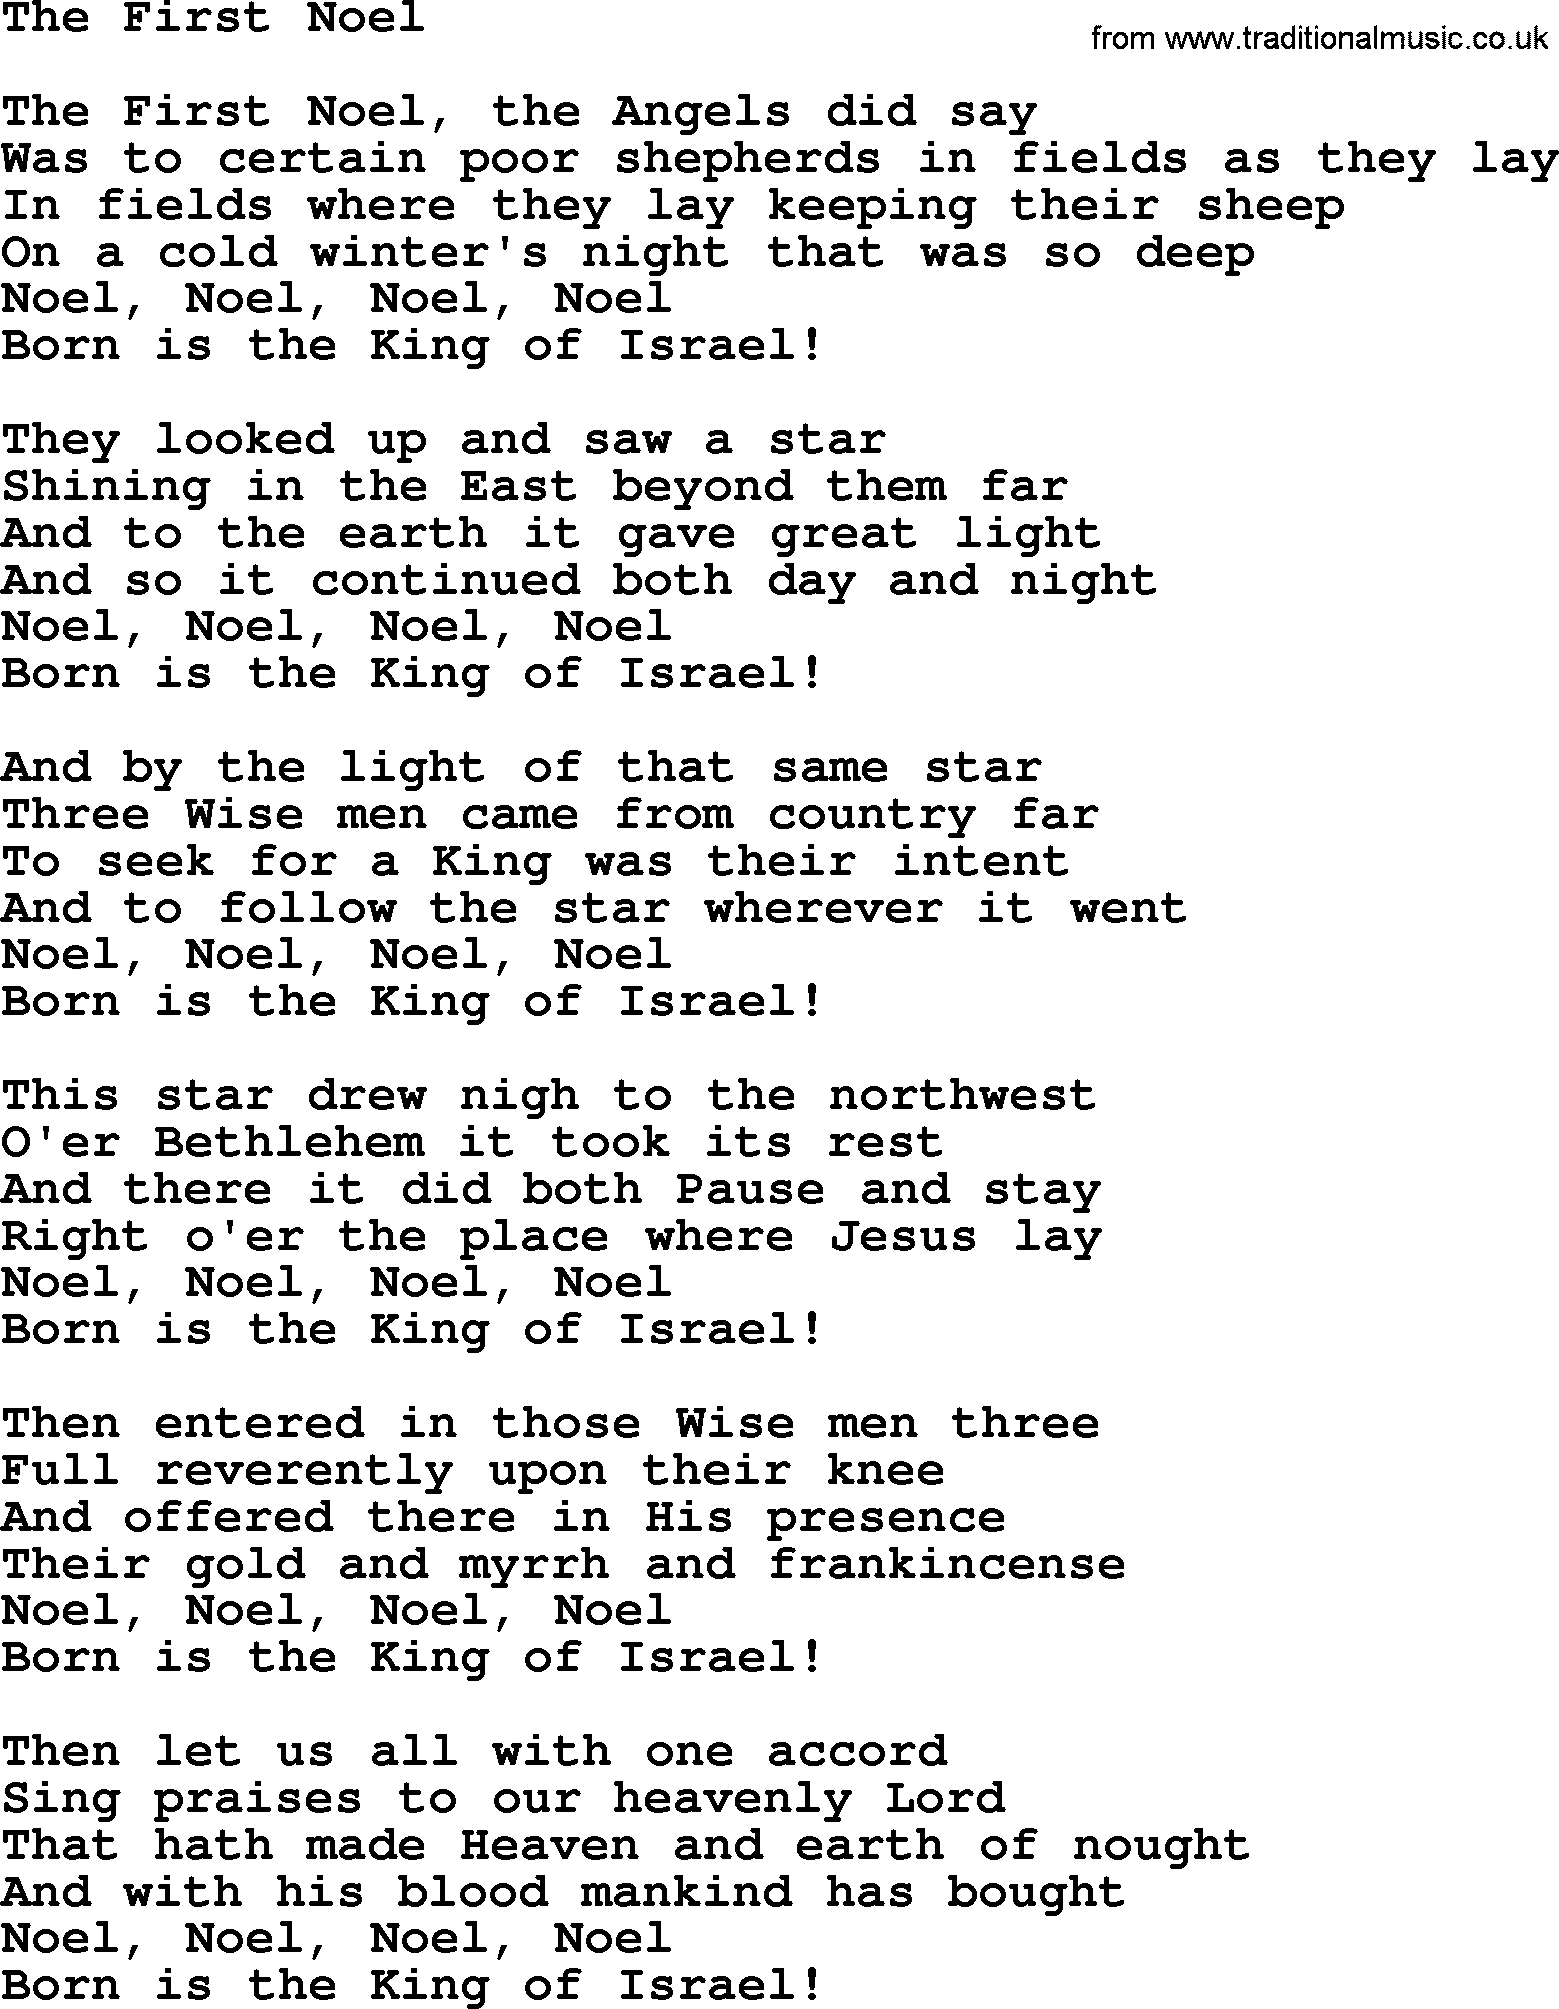 The Byrds song The First Noel, lyrics